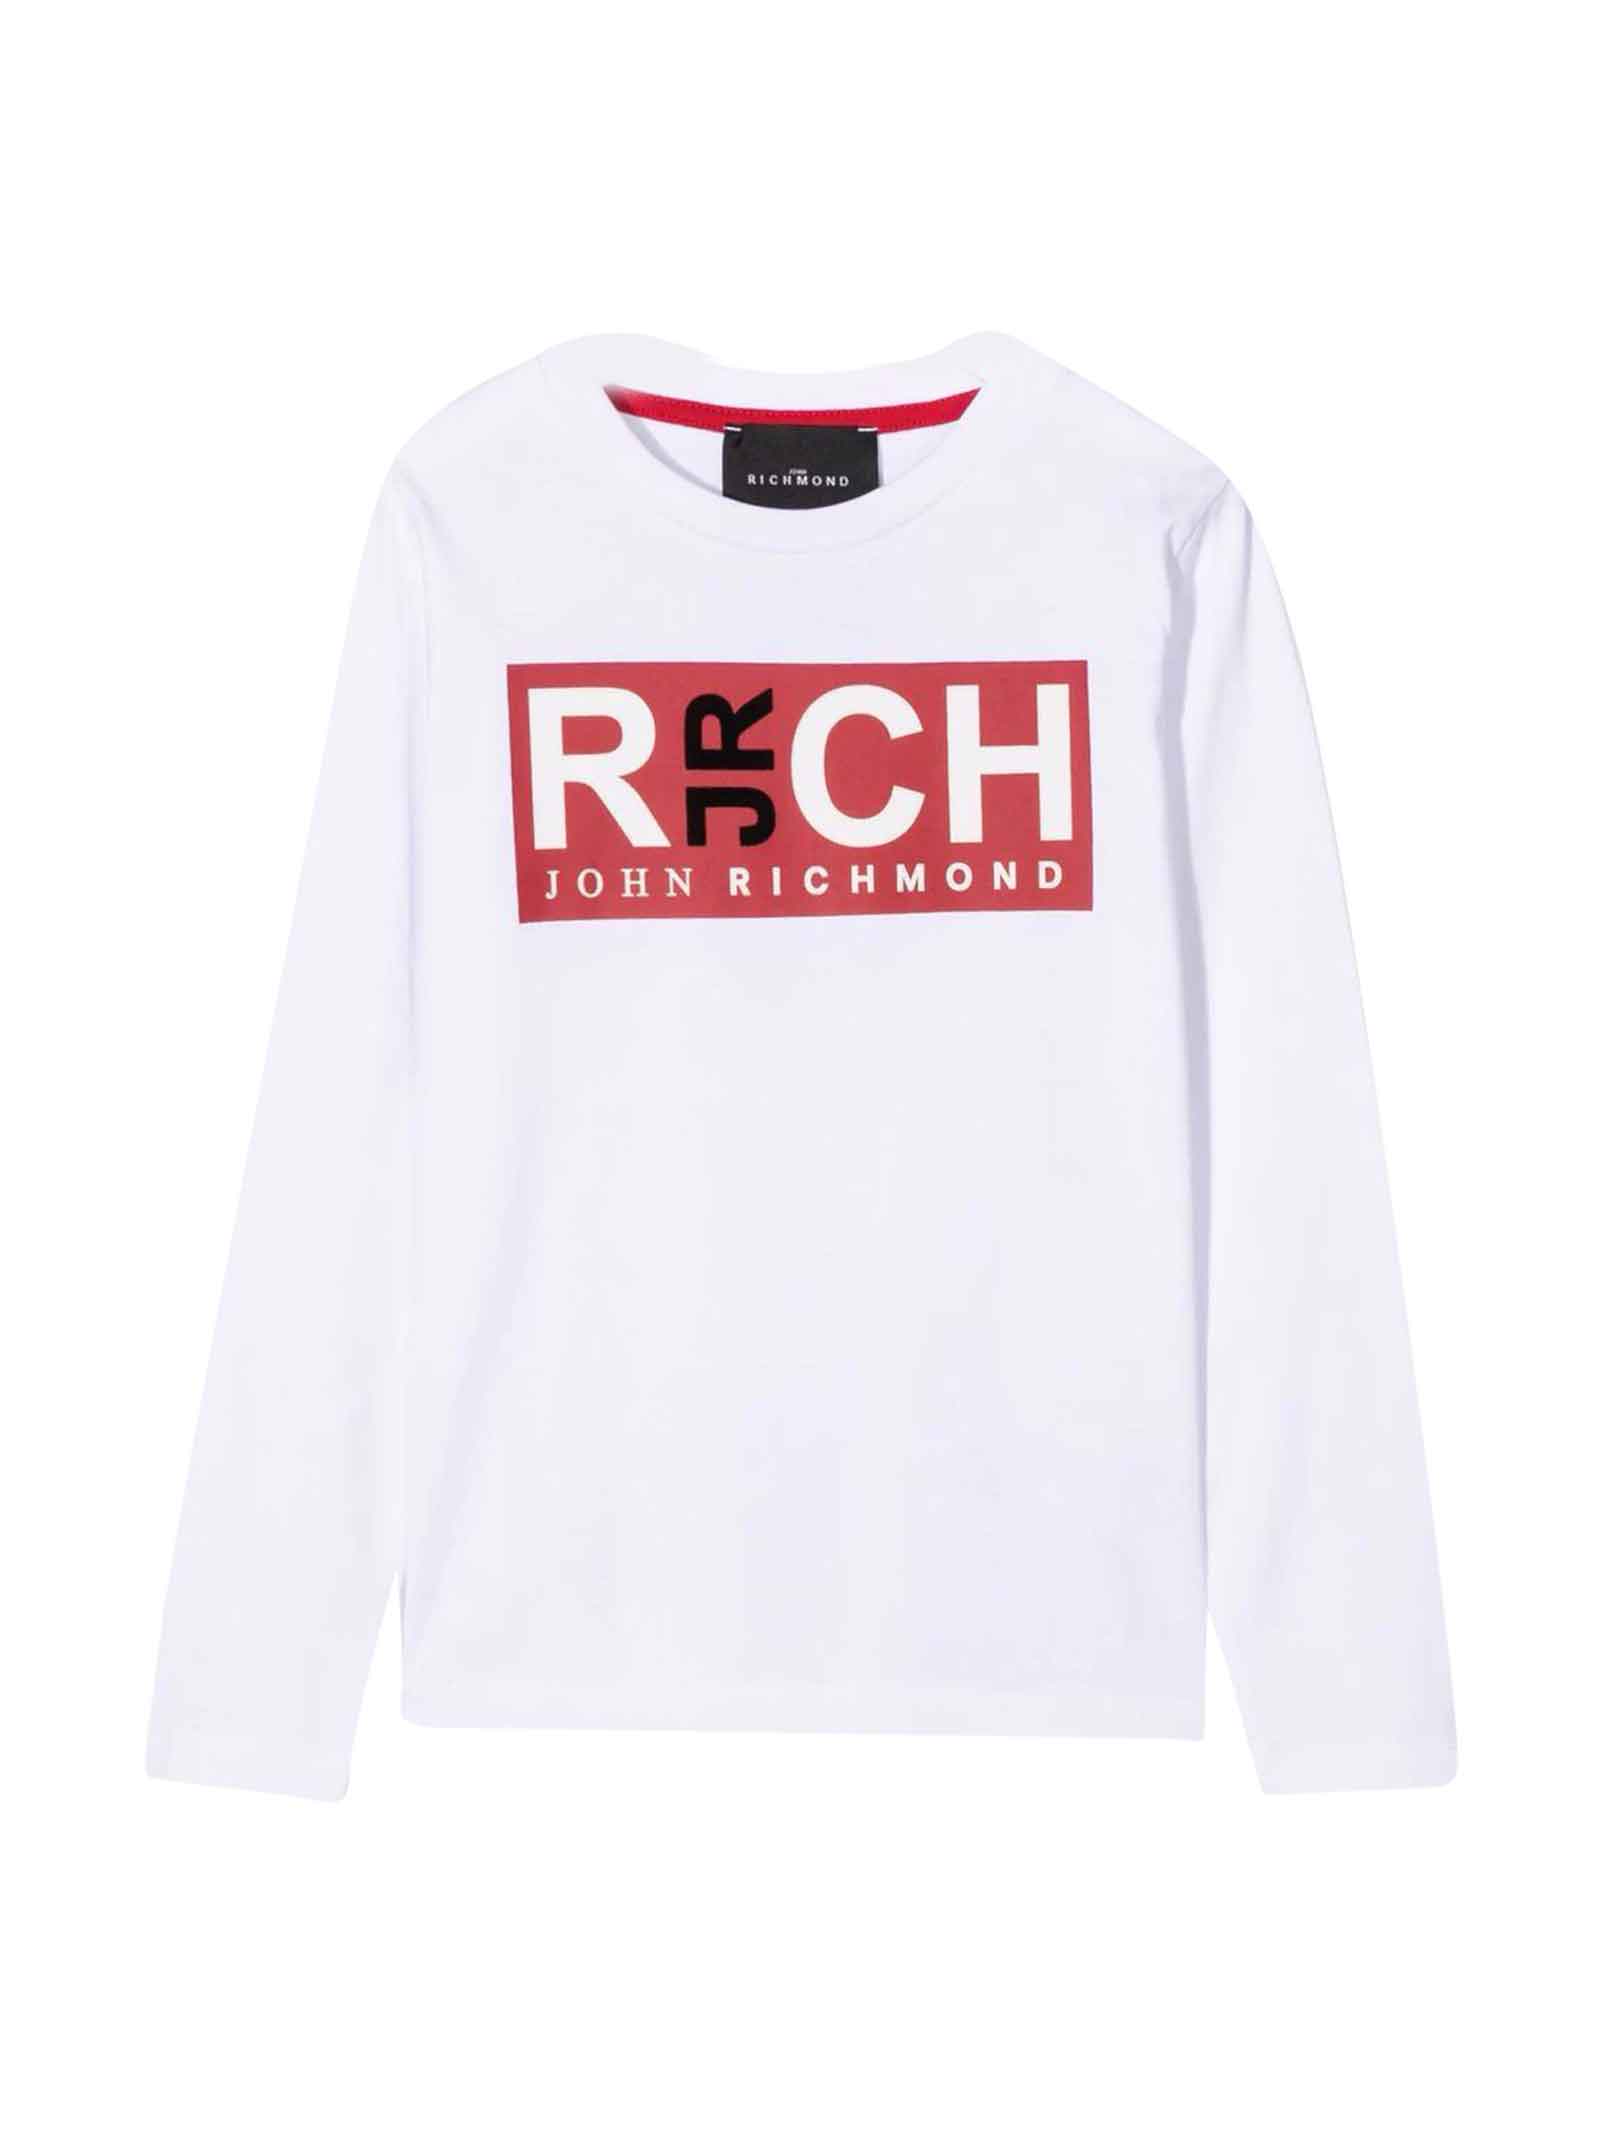 John Richmond White Teen Shirt With Long Sleeves And Red Print